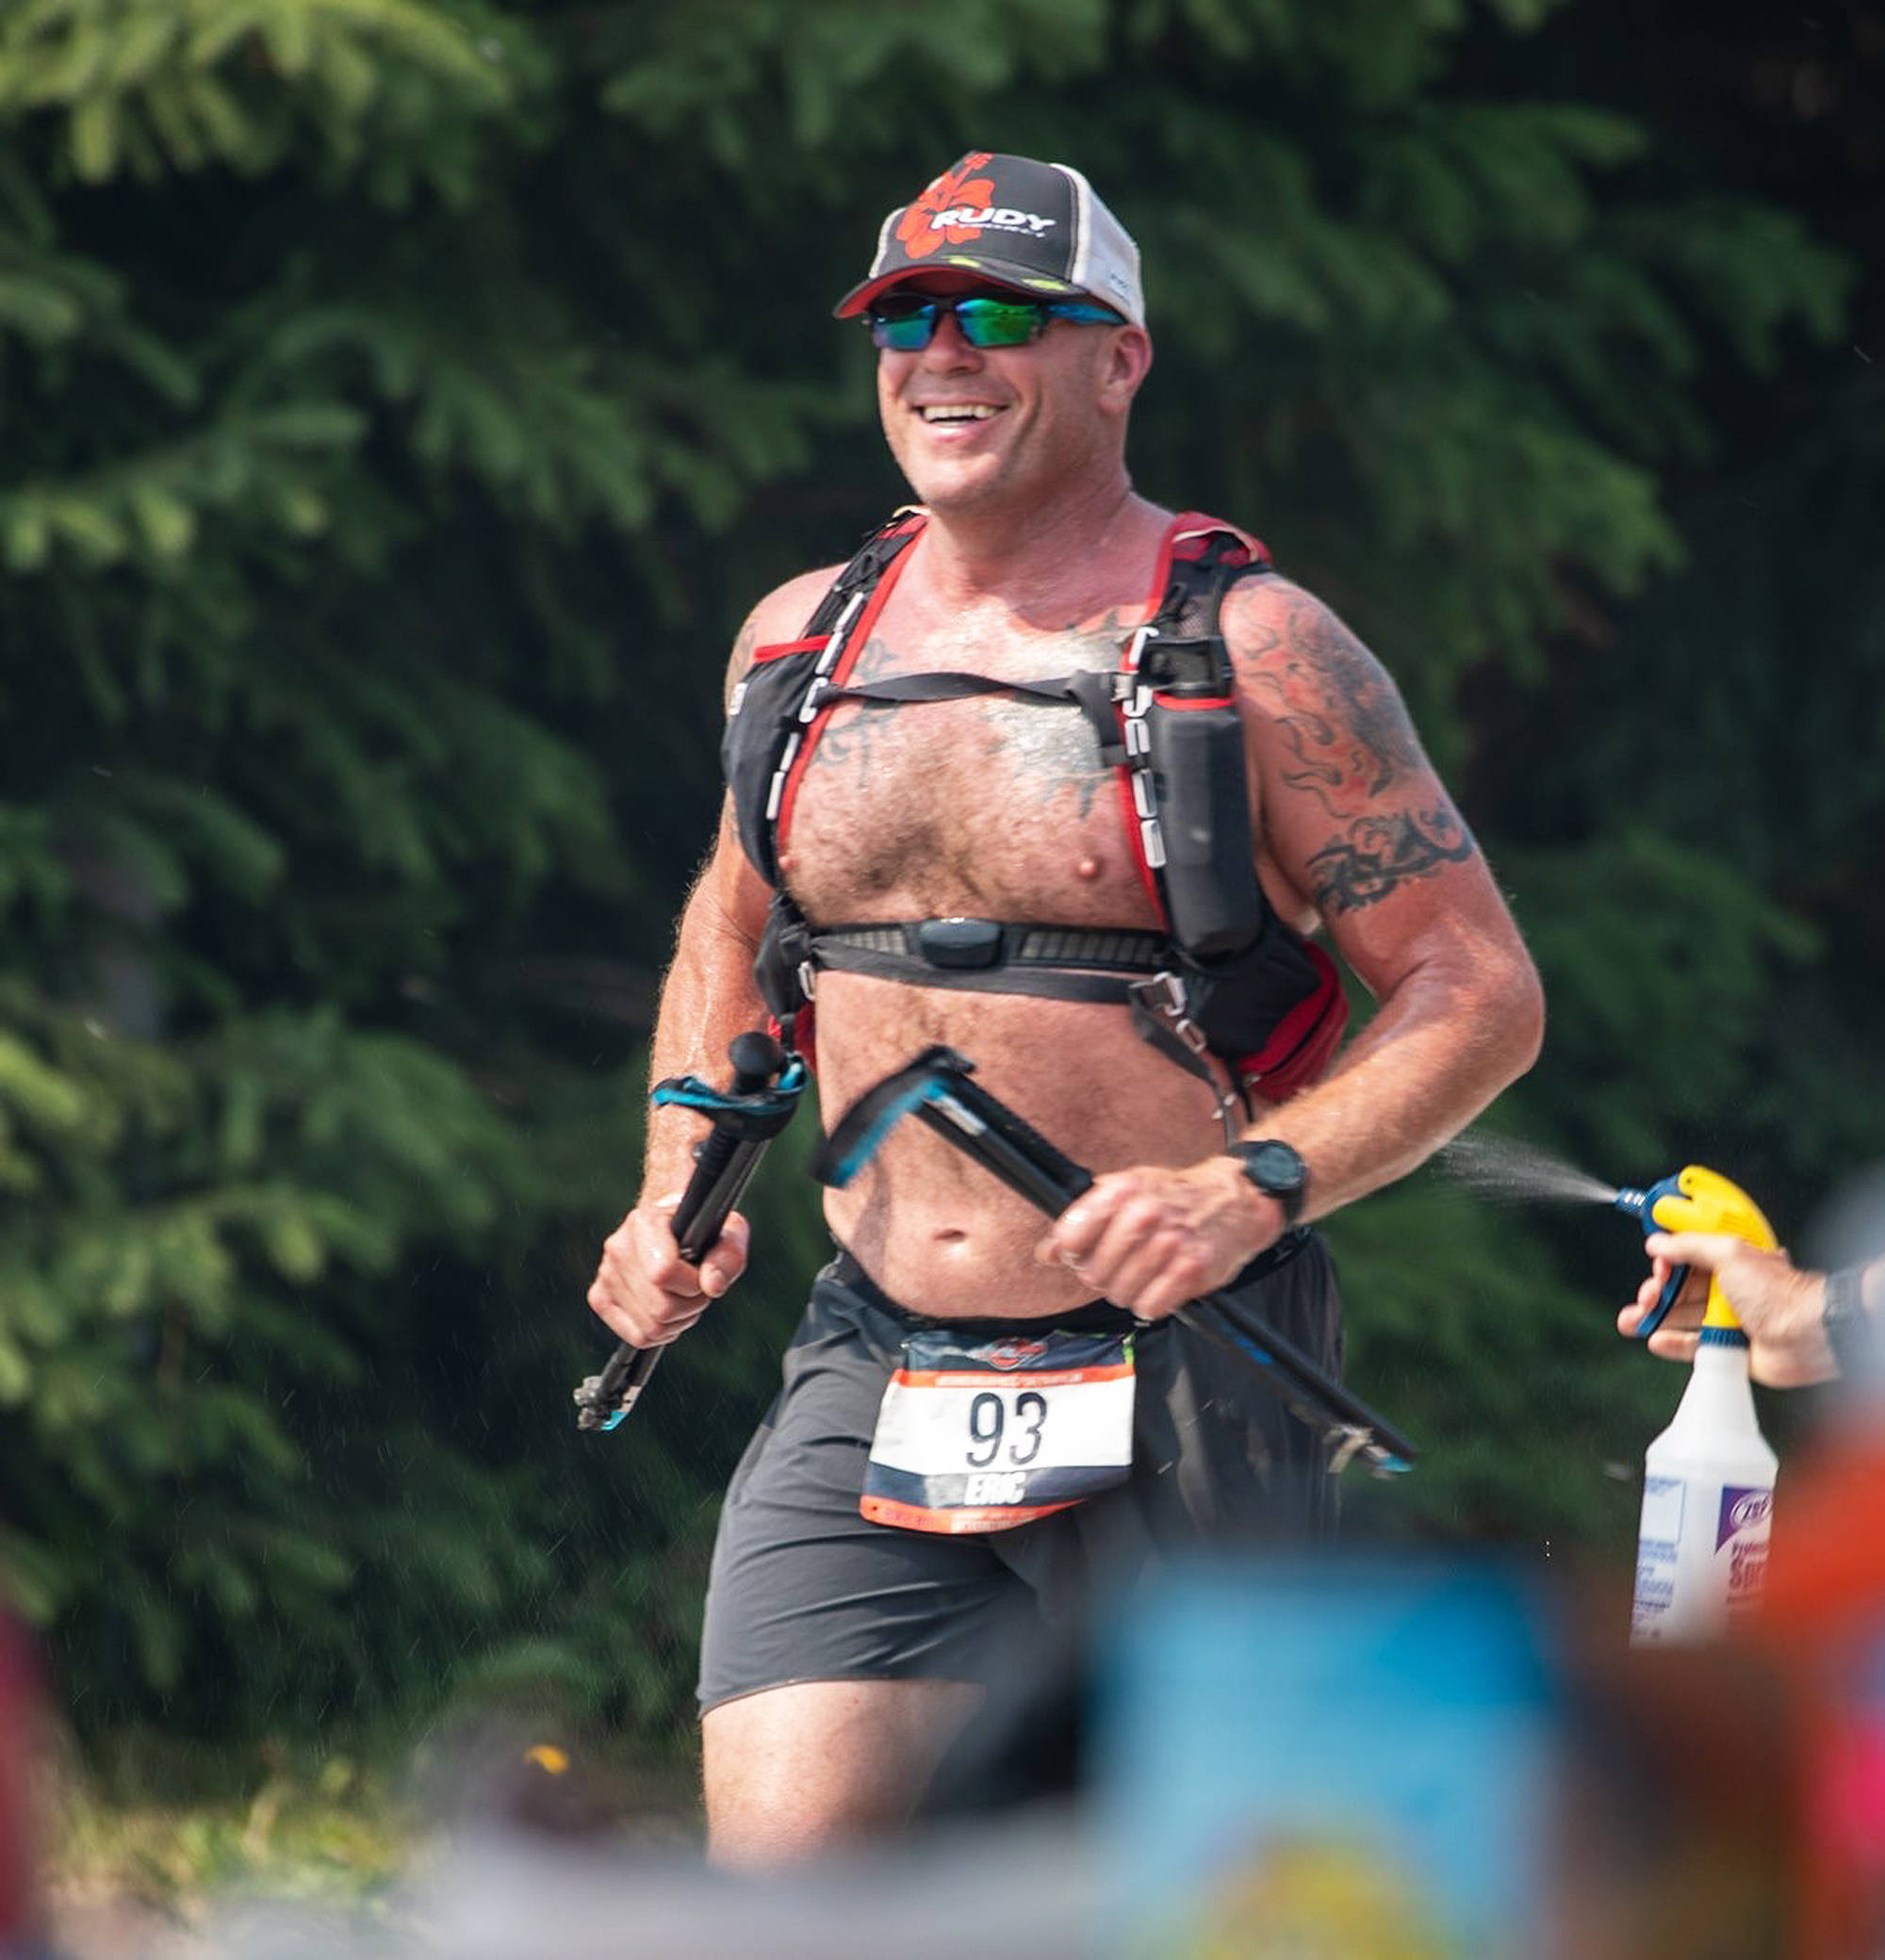 Kenai triathlete Eric Thomason competes in the running portion of the 2019 Alaskaman Extreme Triathlon June 29, 2019. The race starts in Seward and finishes in Girdwood. (Photo provided by Eric Thomason)